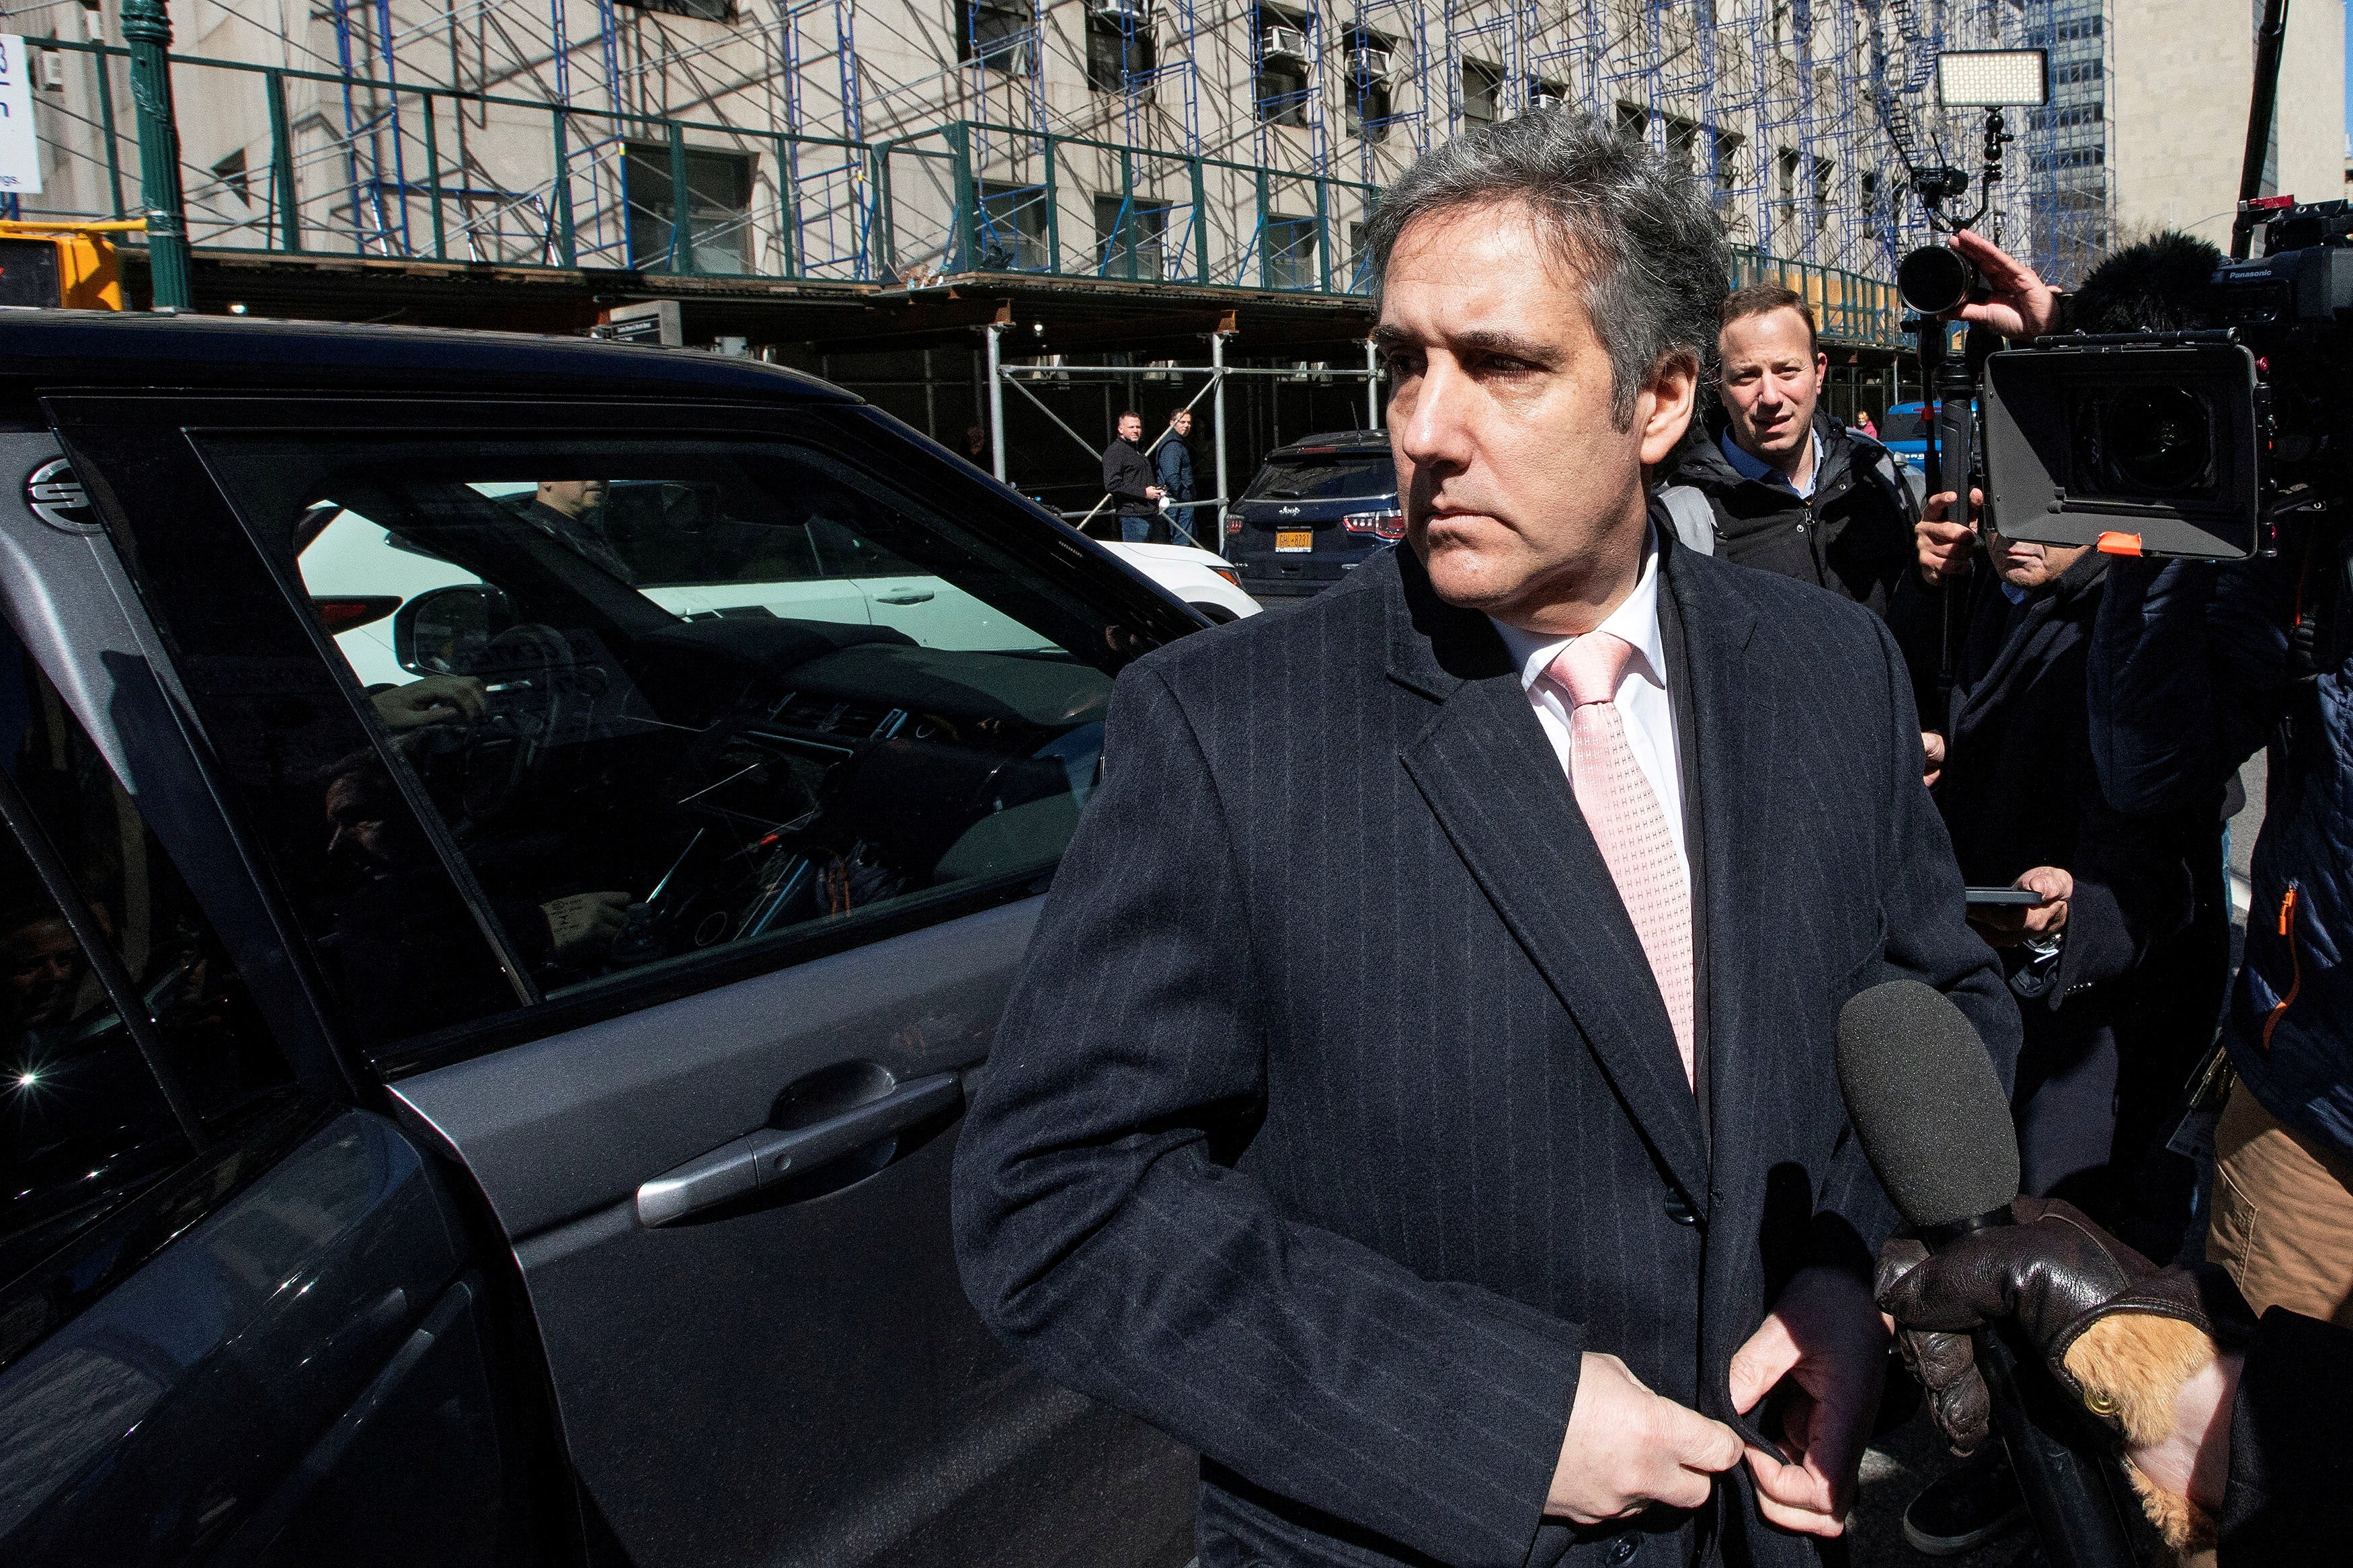 Michael Cohen has been a key witness against Mr Trump after pleading guilty to violating federal campaign finance law in connection with the payments